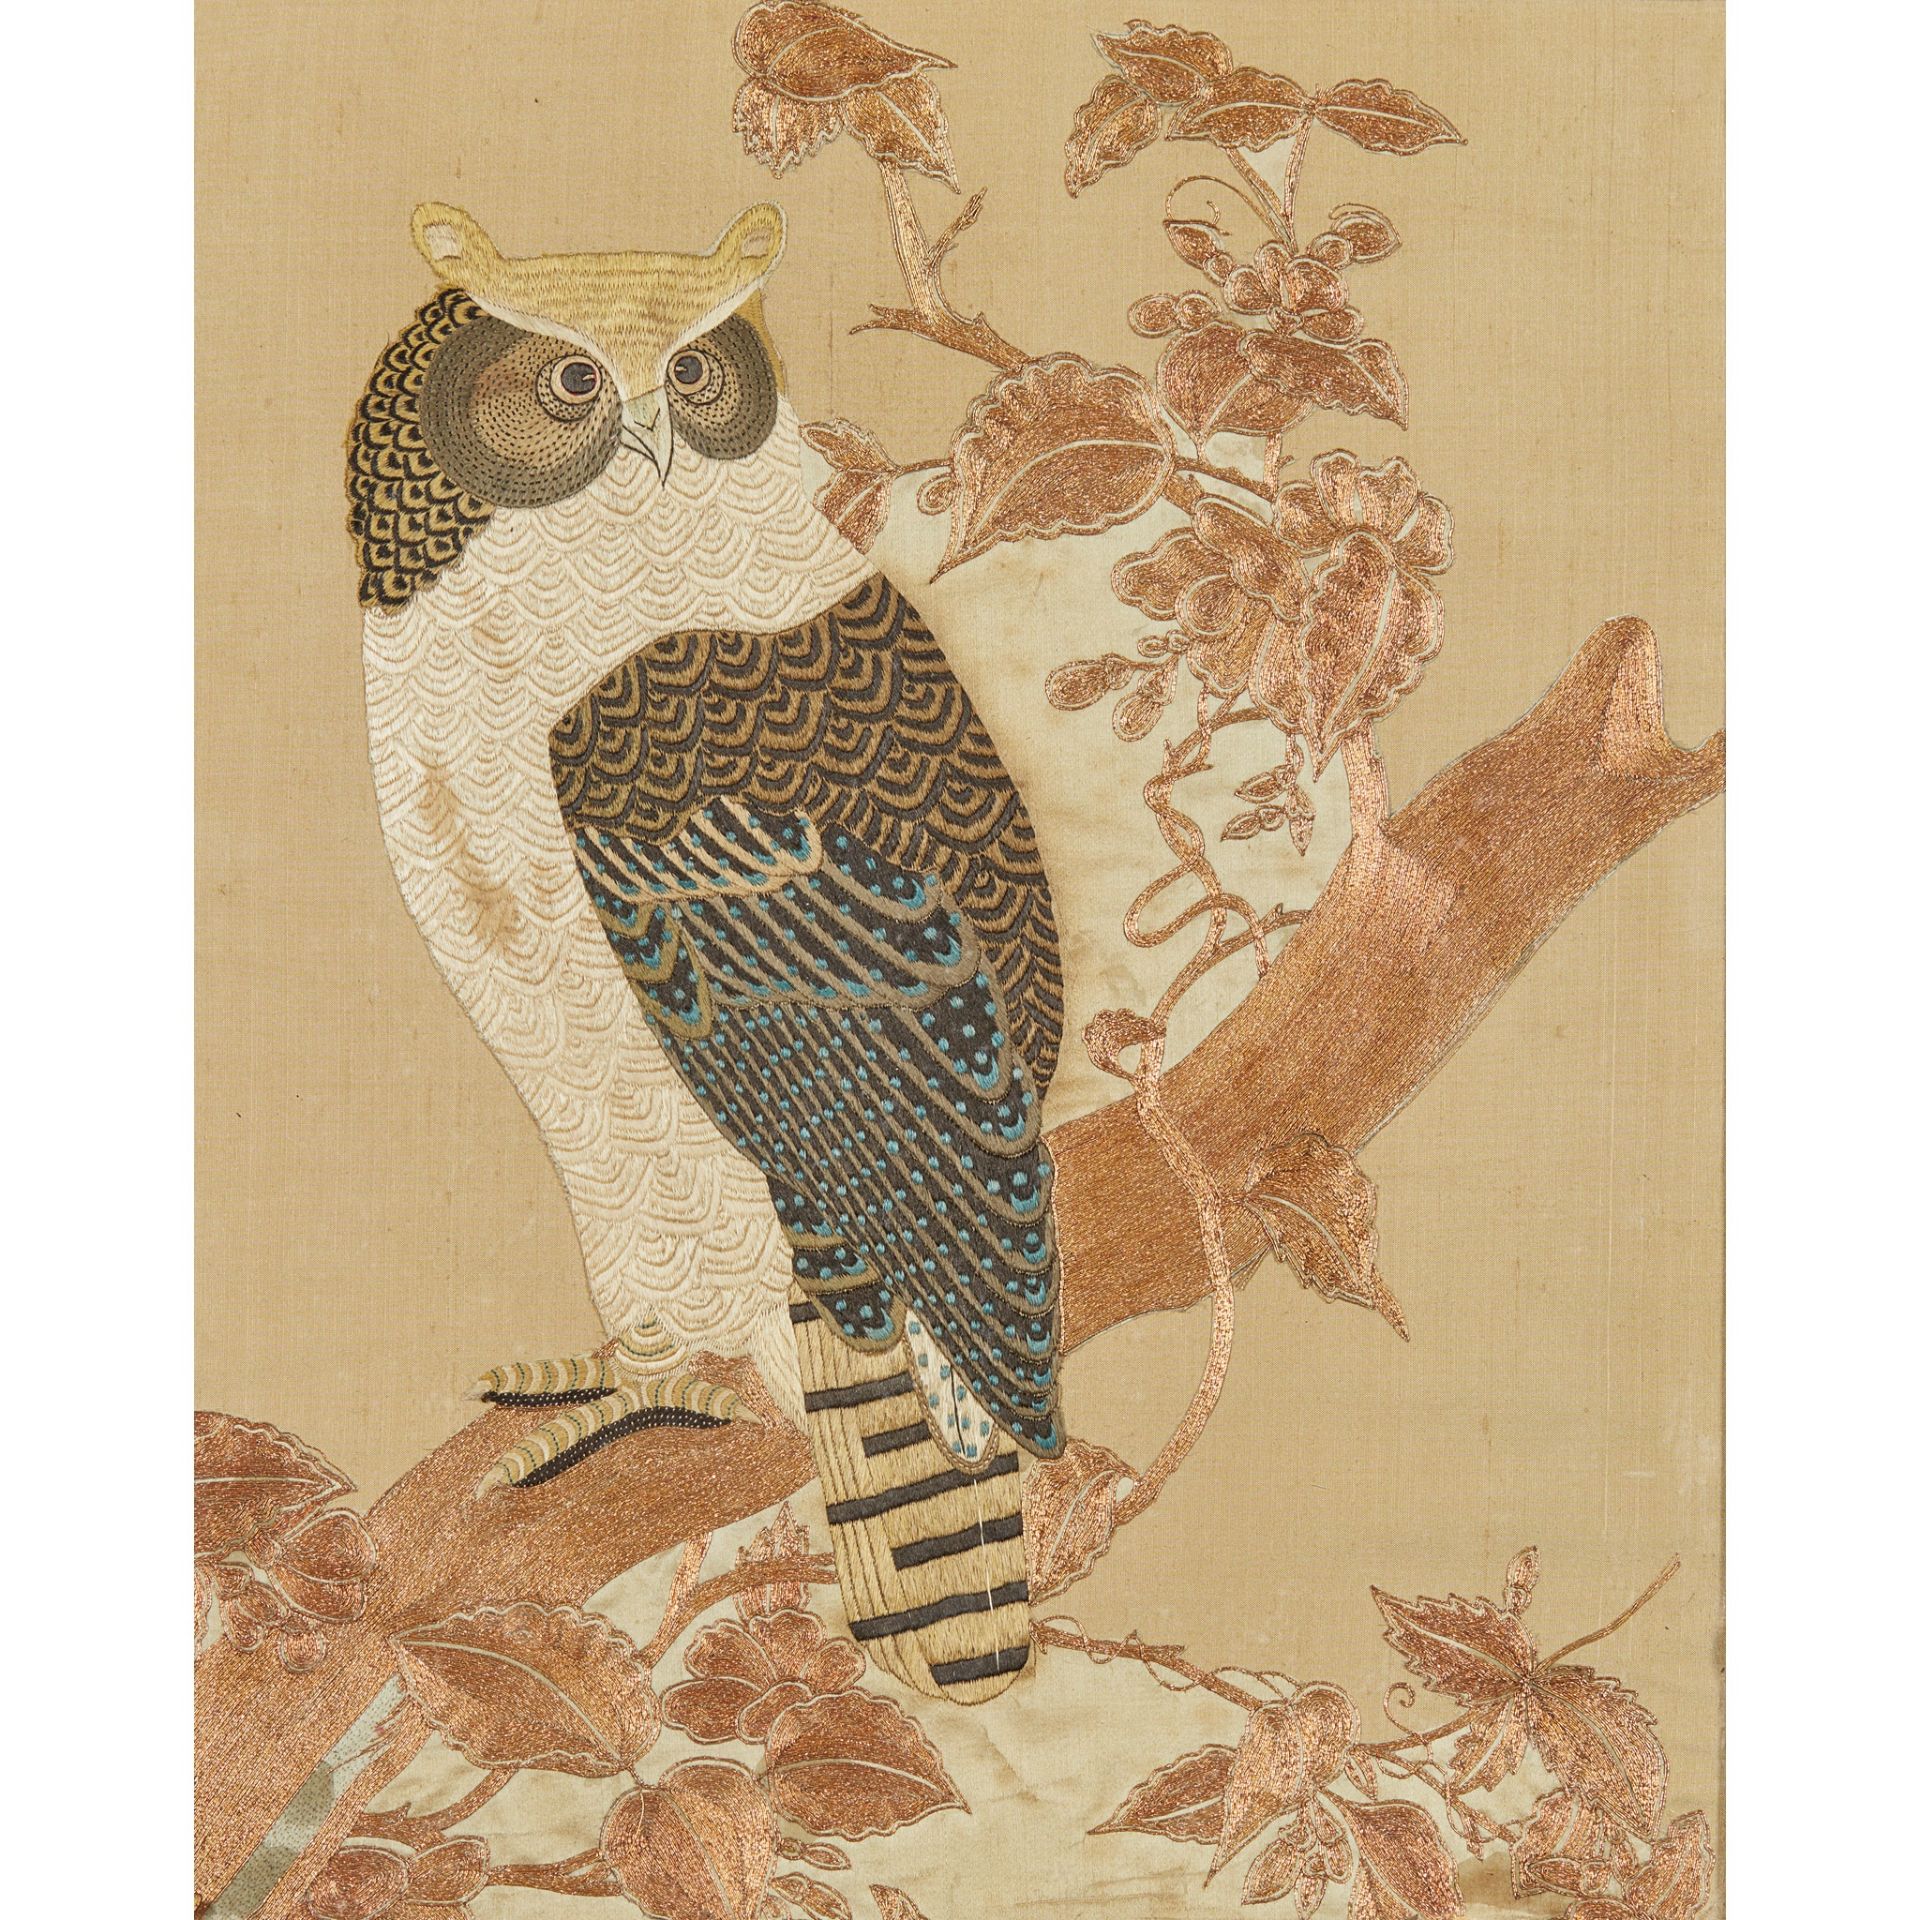 JAPANESE EMBROIDERED PANEL OF AN OWL, MEIJI PERIOD CIRCA 1880